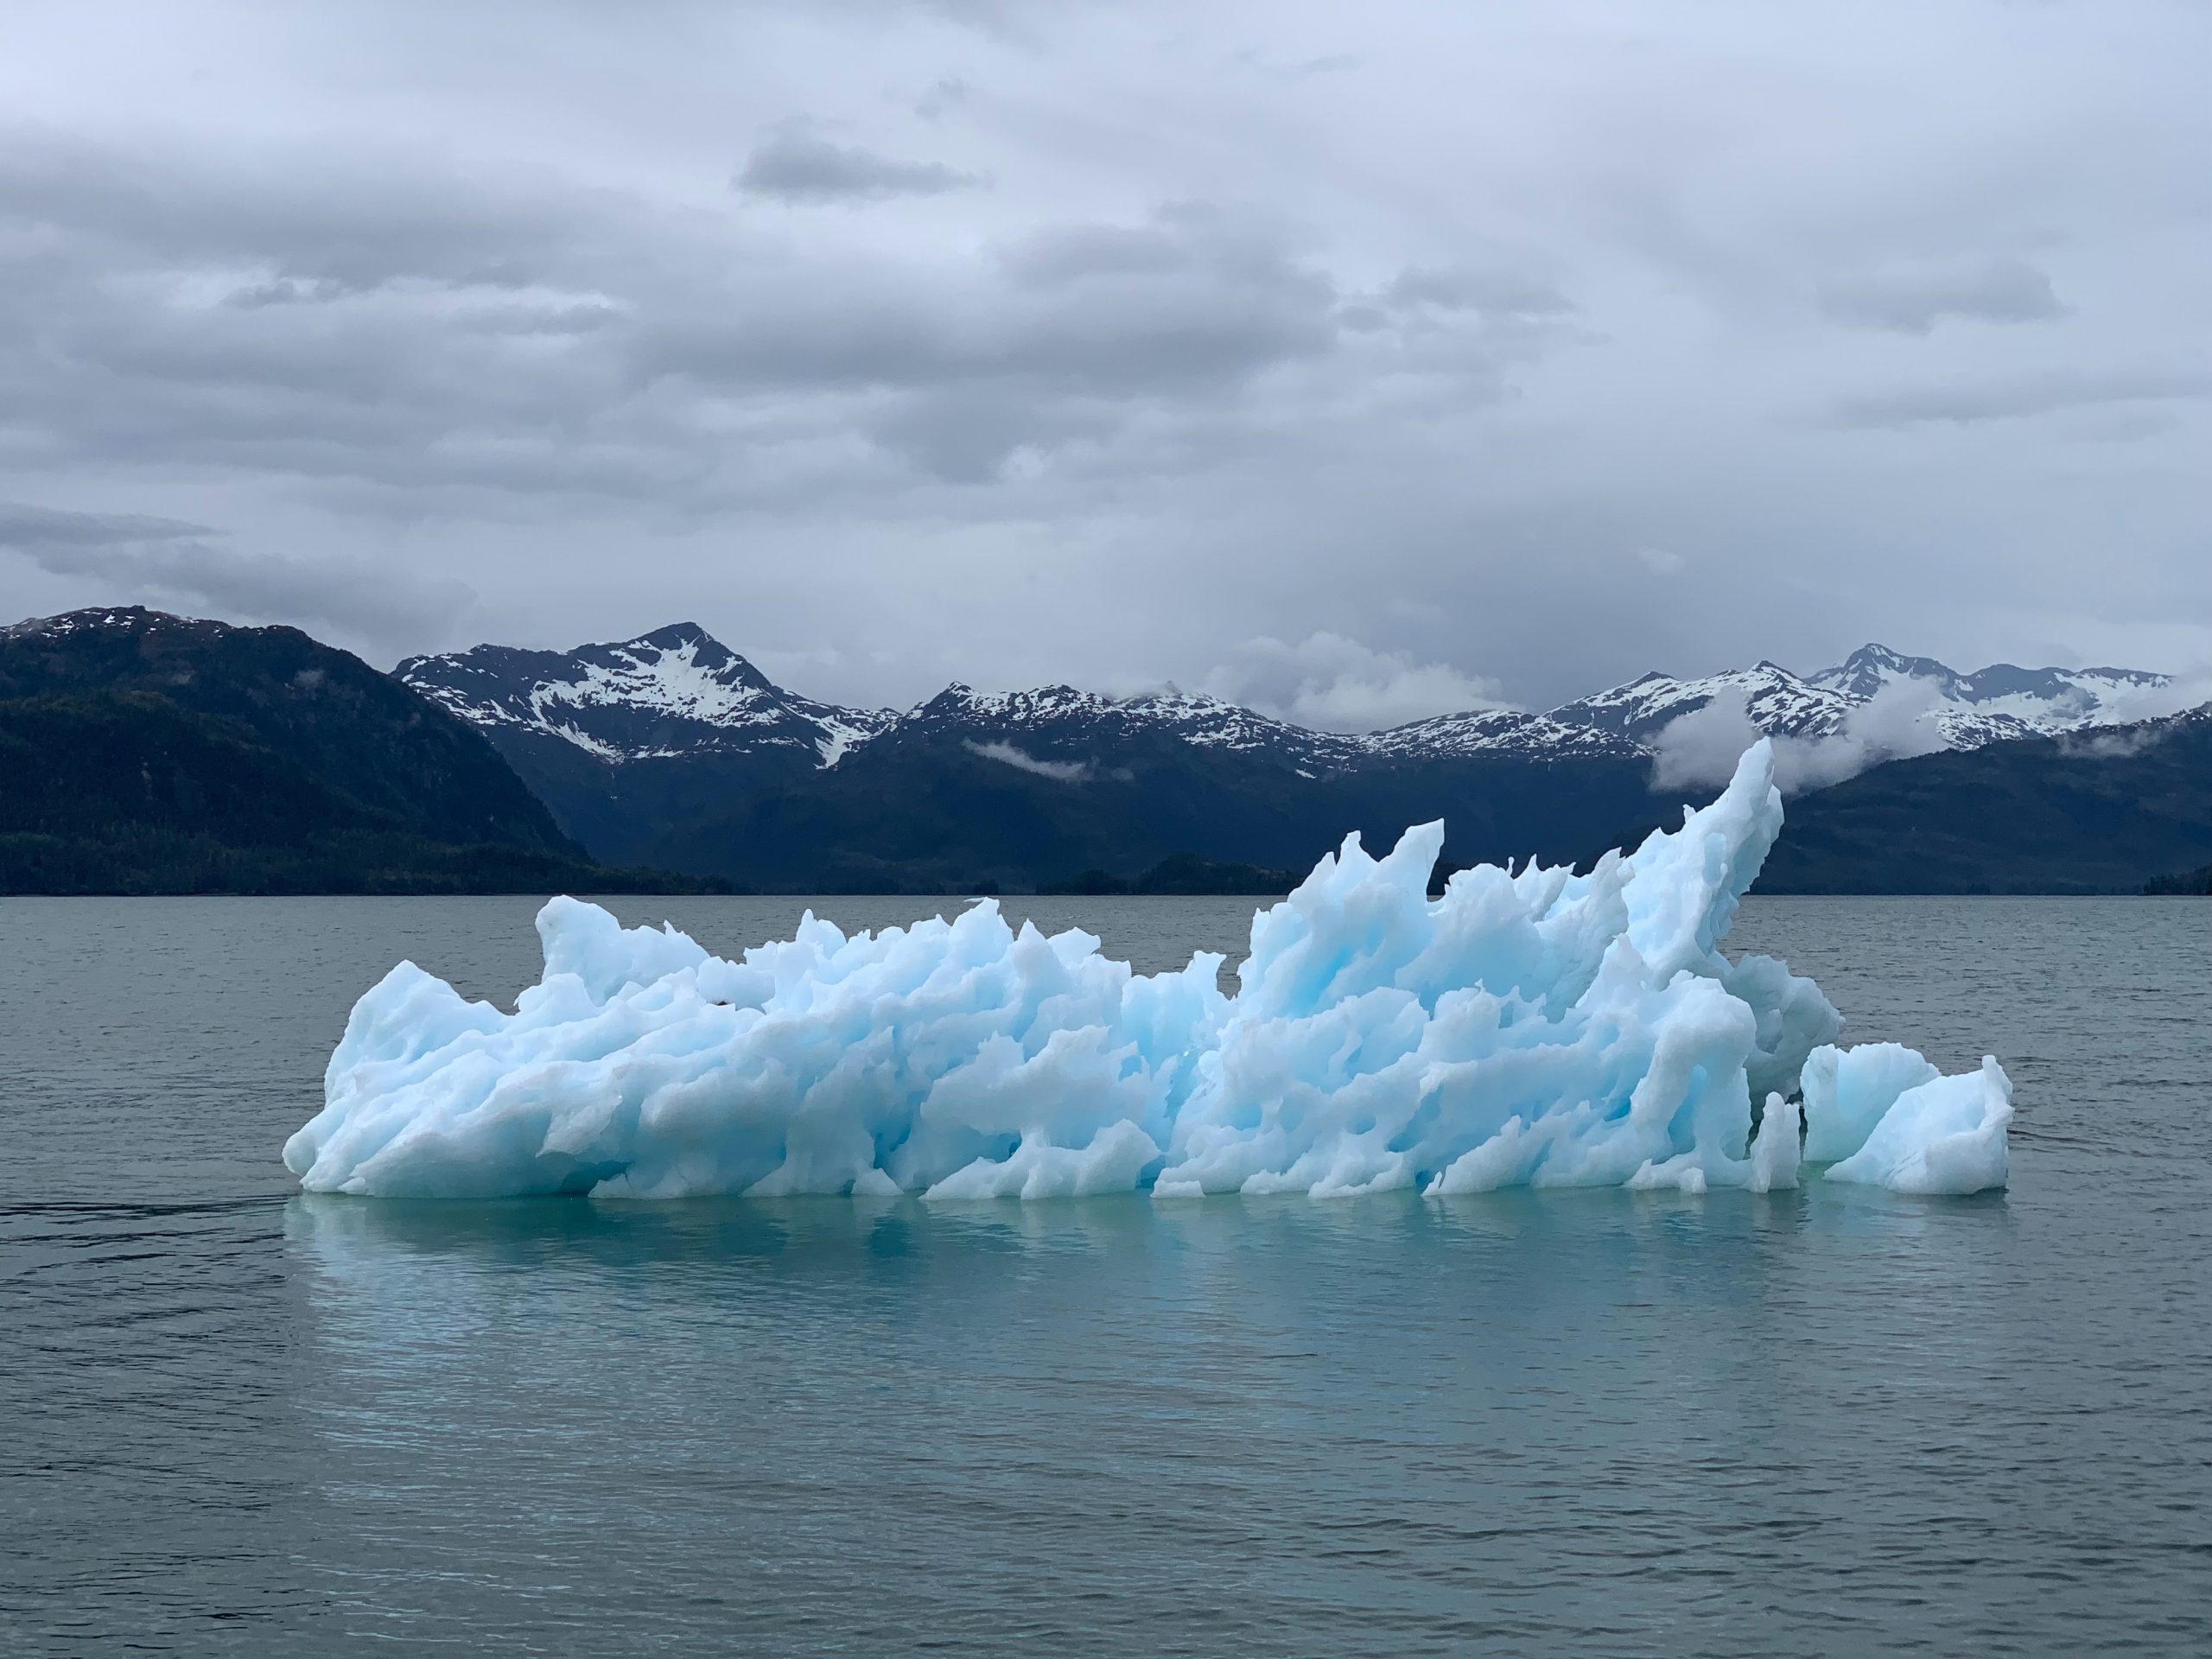 A small, melted glacier sits in the water against a grey sky. 